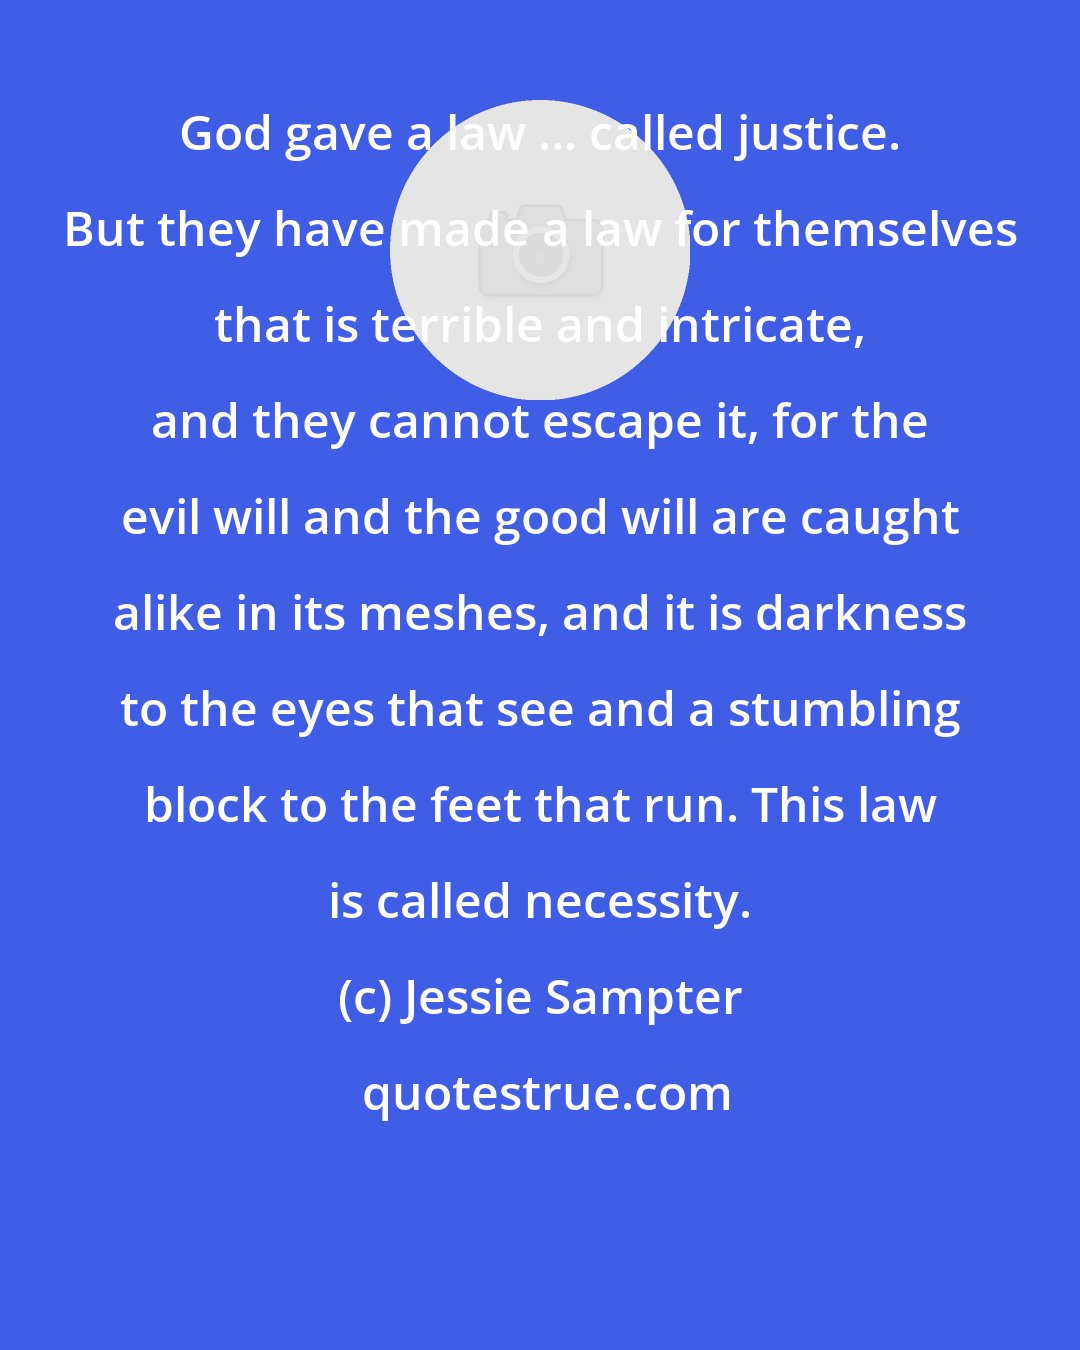 Jessie Sampter: God gave a law ... called justice. But they have made a law for themselves that is terrible and intricate, and they cannot escape it, for the evil will and the good will are caught alike in its meshes, and it is darkness to the eyes that see and a stumbling block to the feet that run. This law is called necessity.